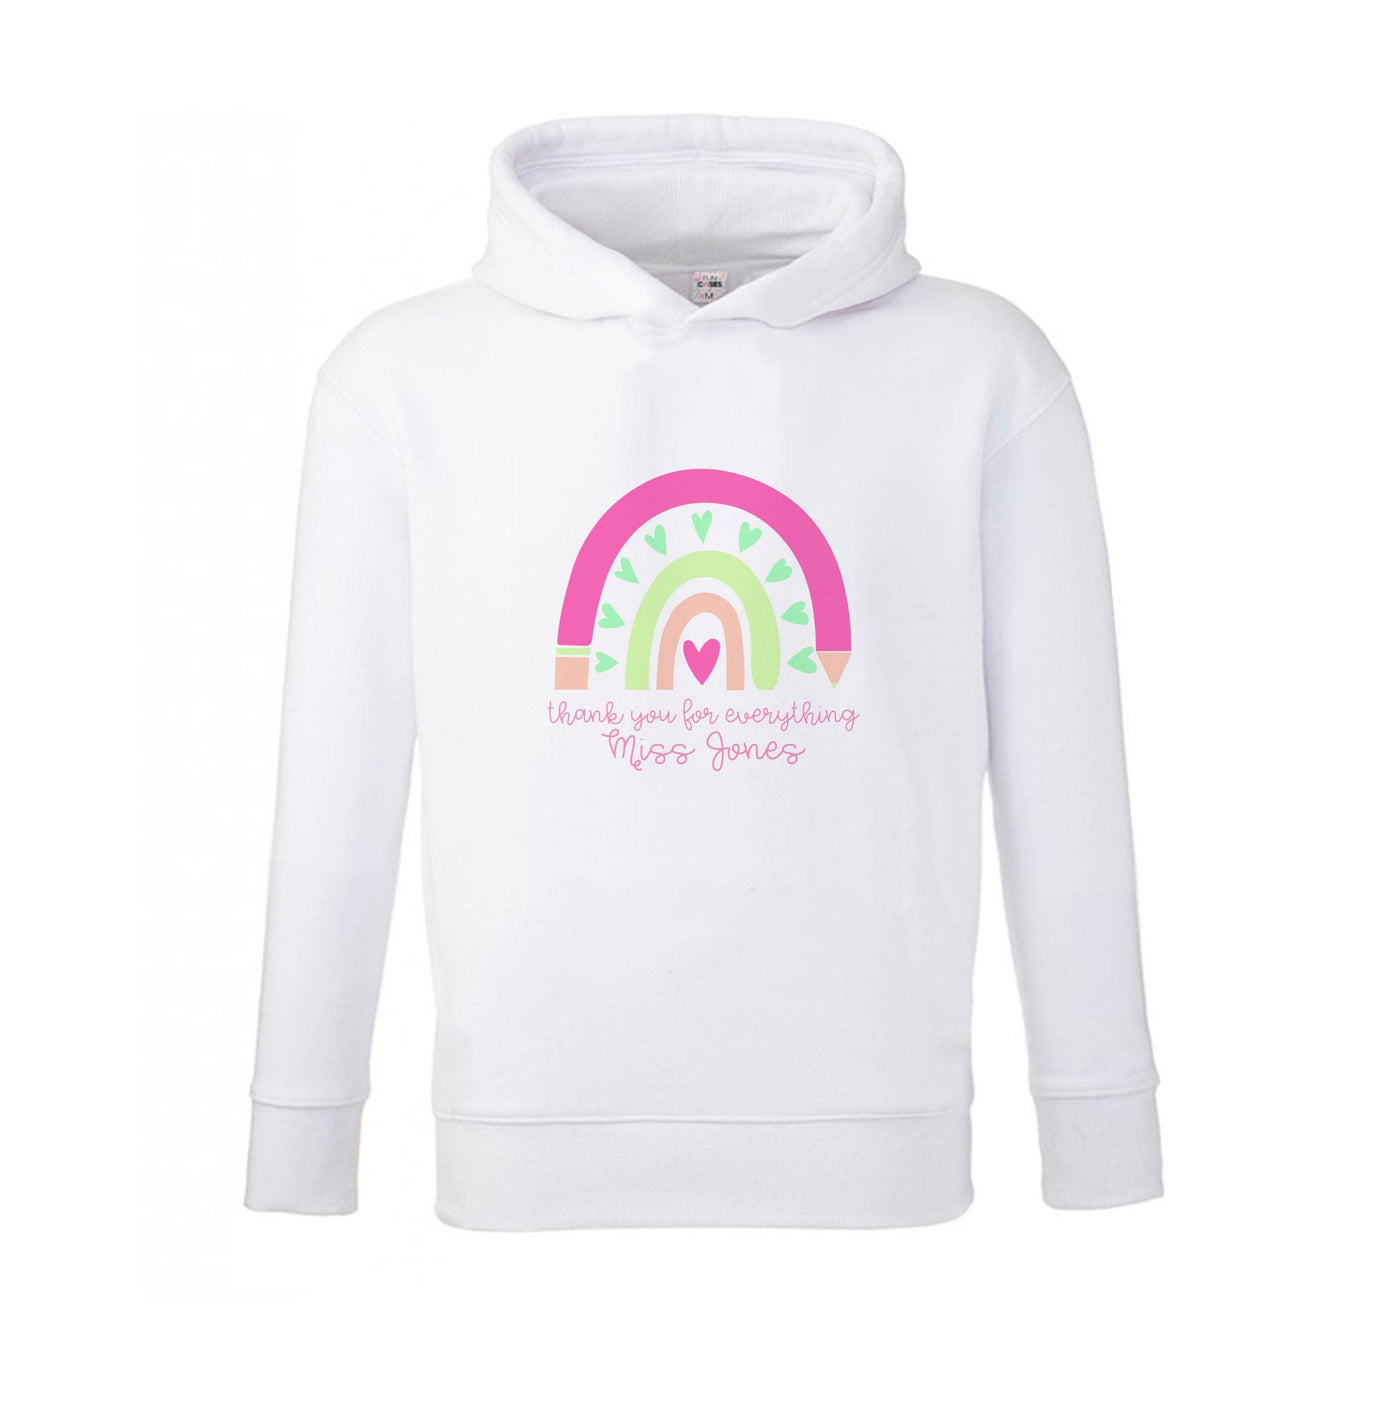 Thank You For Everything - Personalised Teachers Gift Kids Hoodie